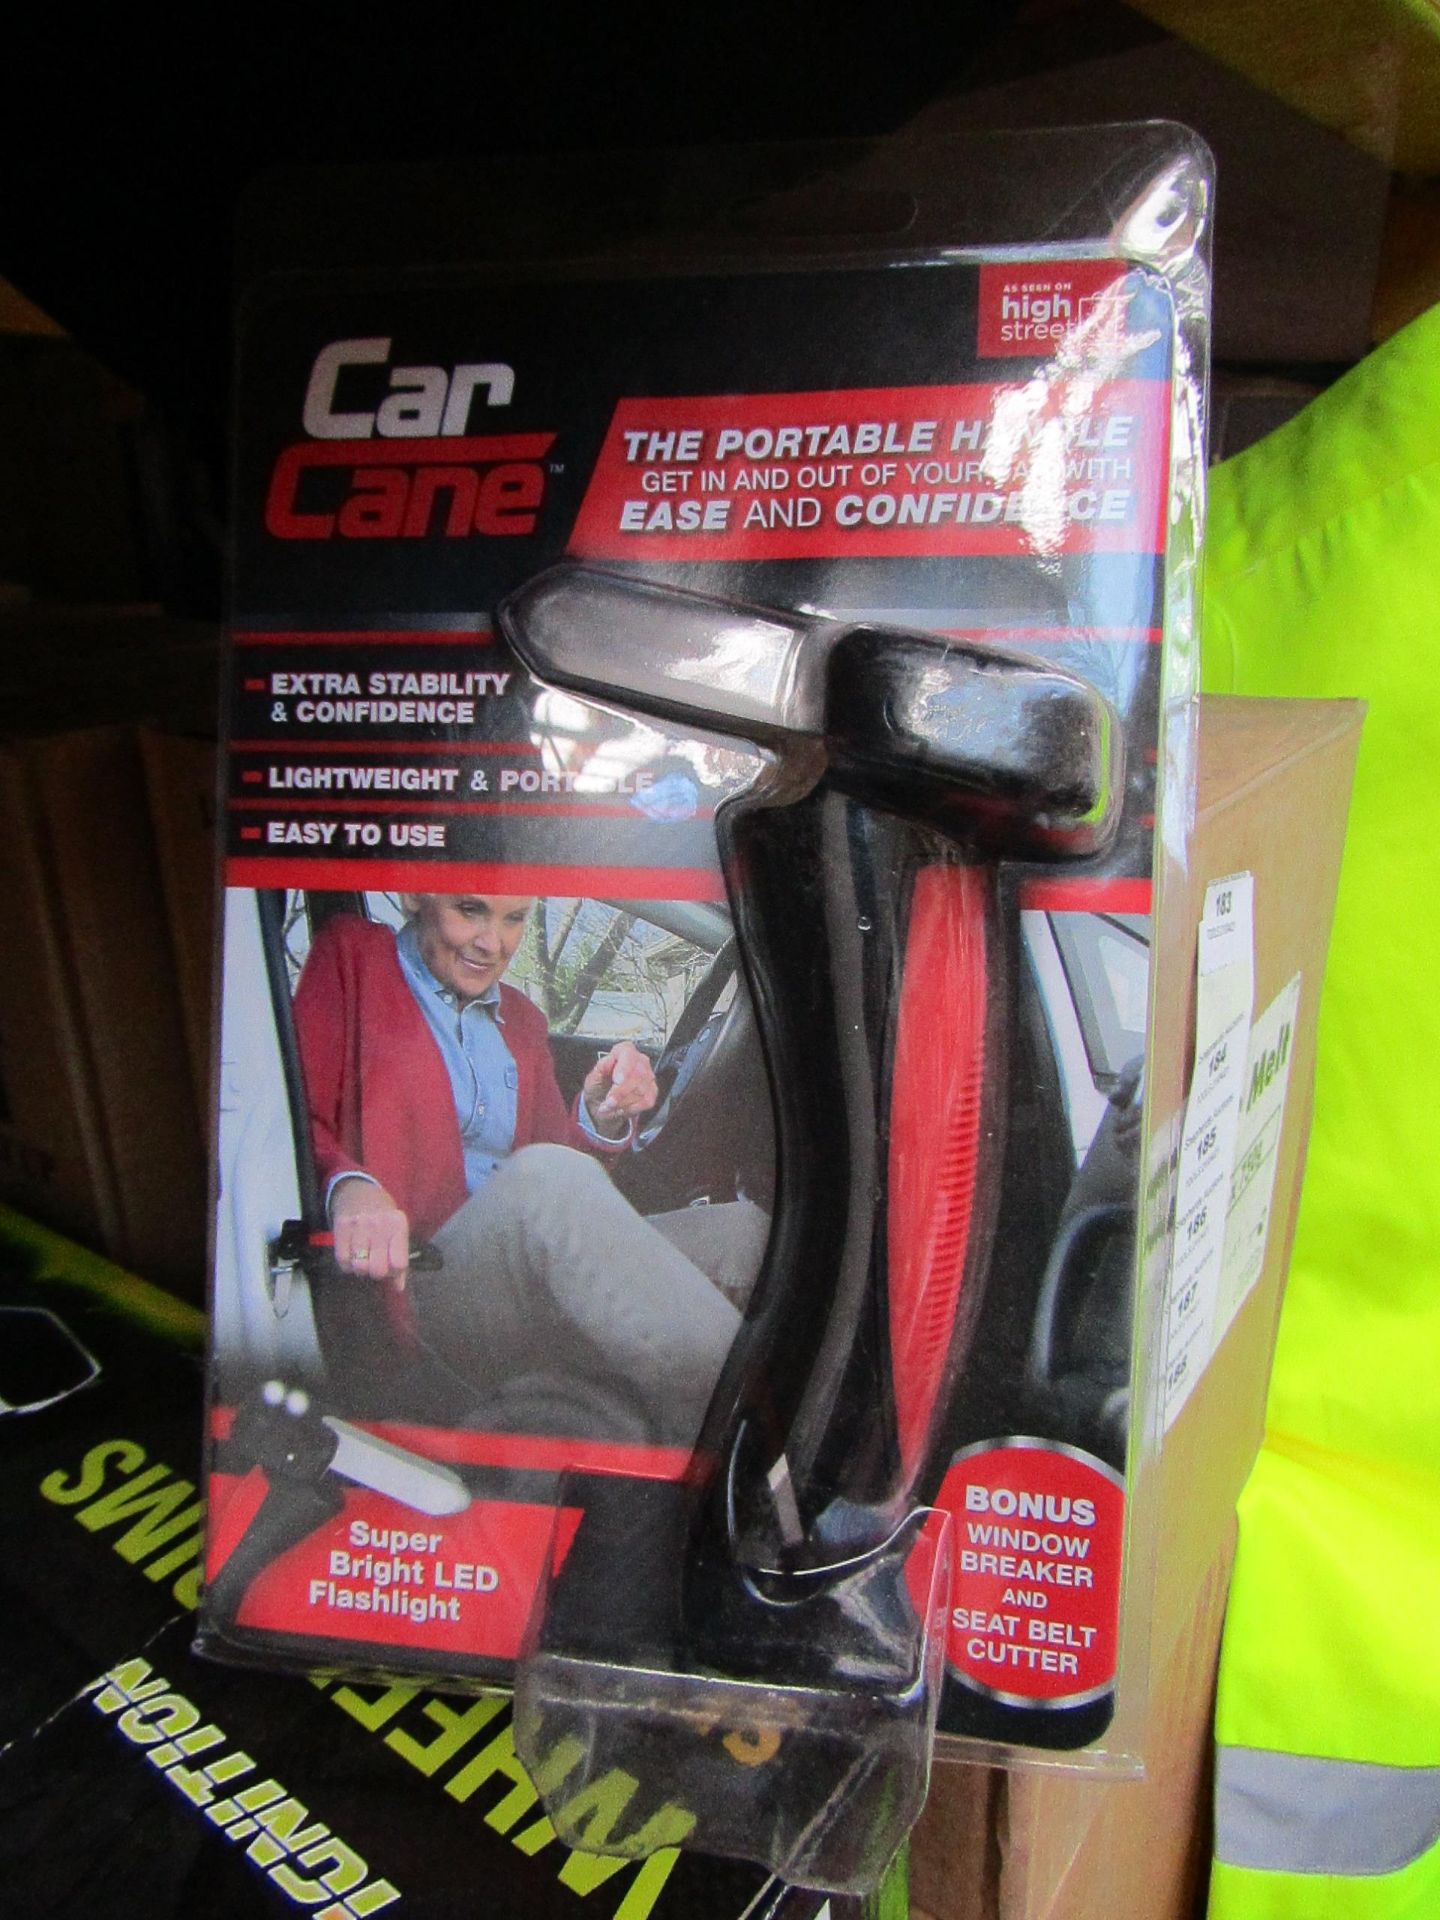 | 2x | CAR CANE EXTRA STABILITY & CONFIDENCE | NEW & PACKAGED | SKU 5060191463300 | RRP £14.99 |